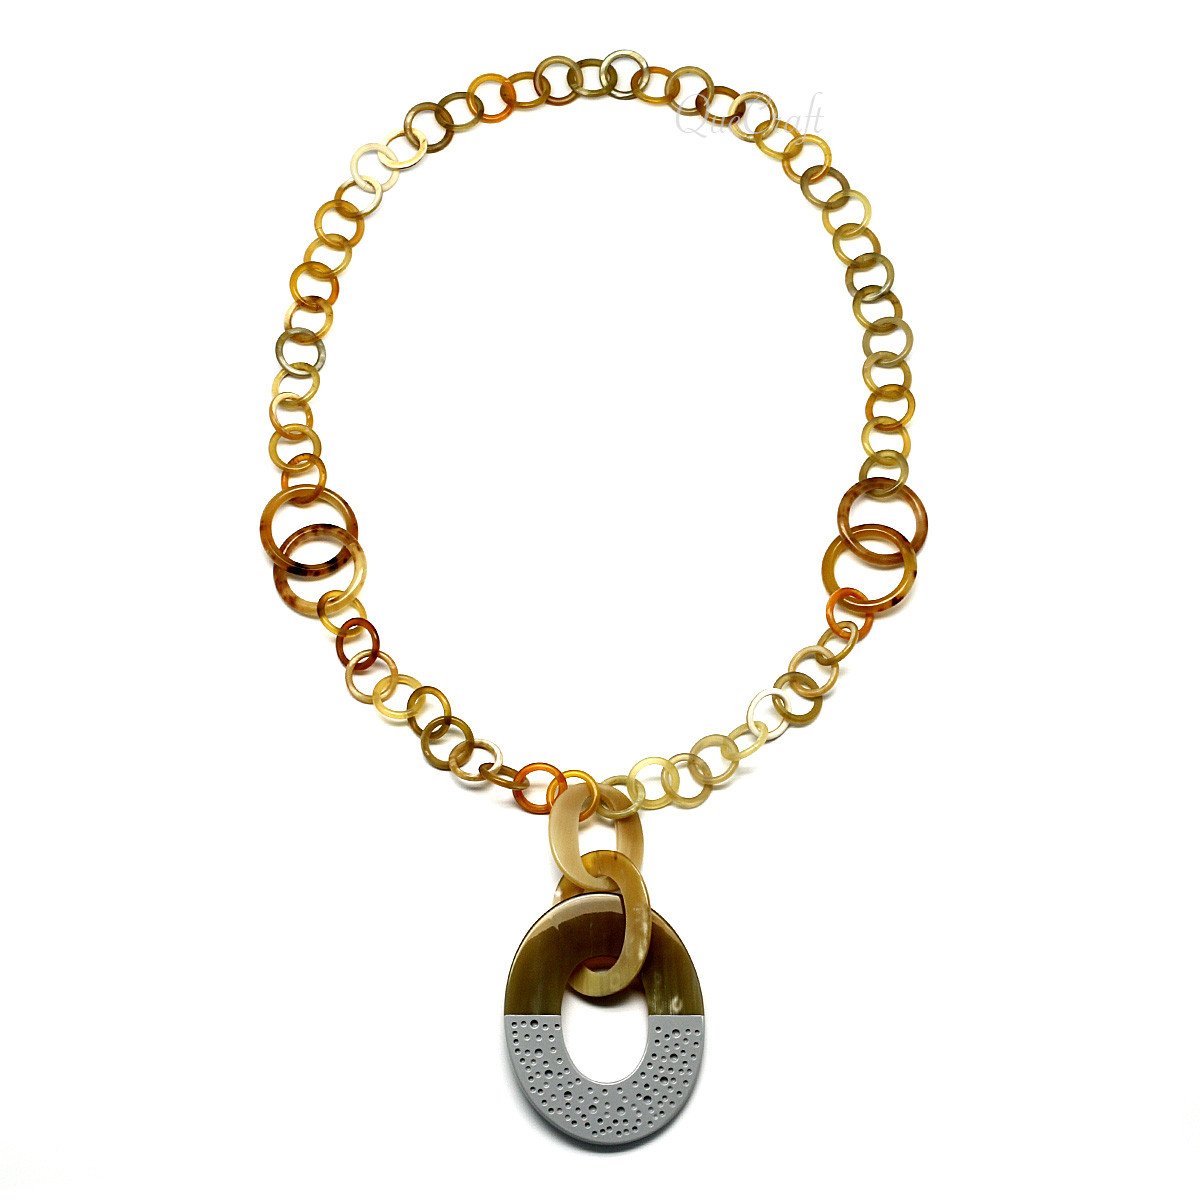 Horn & Lacquer Chain Necklace #9673 - HORN JEWELRY